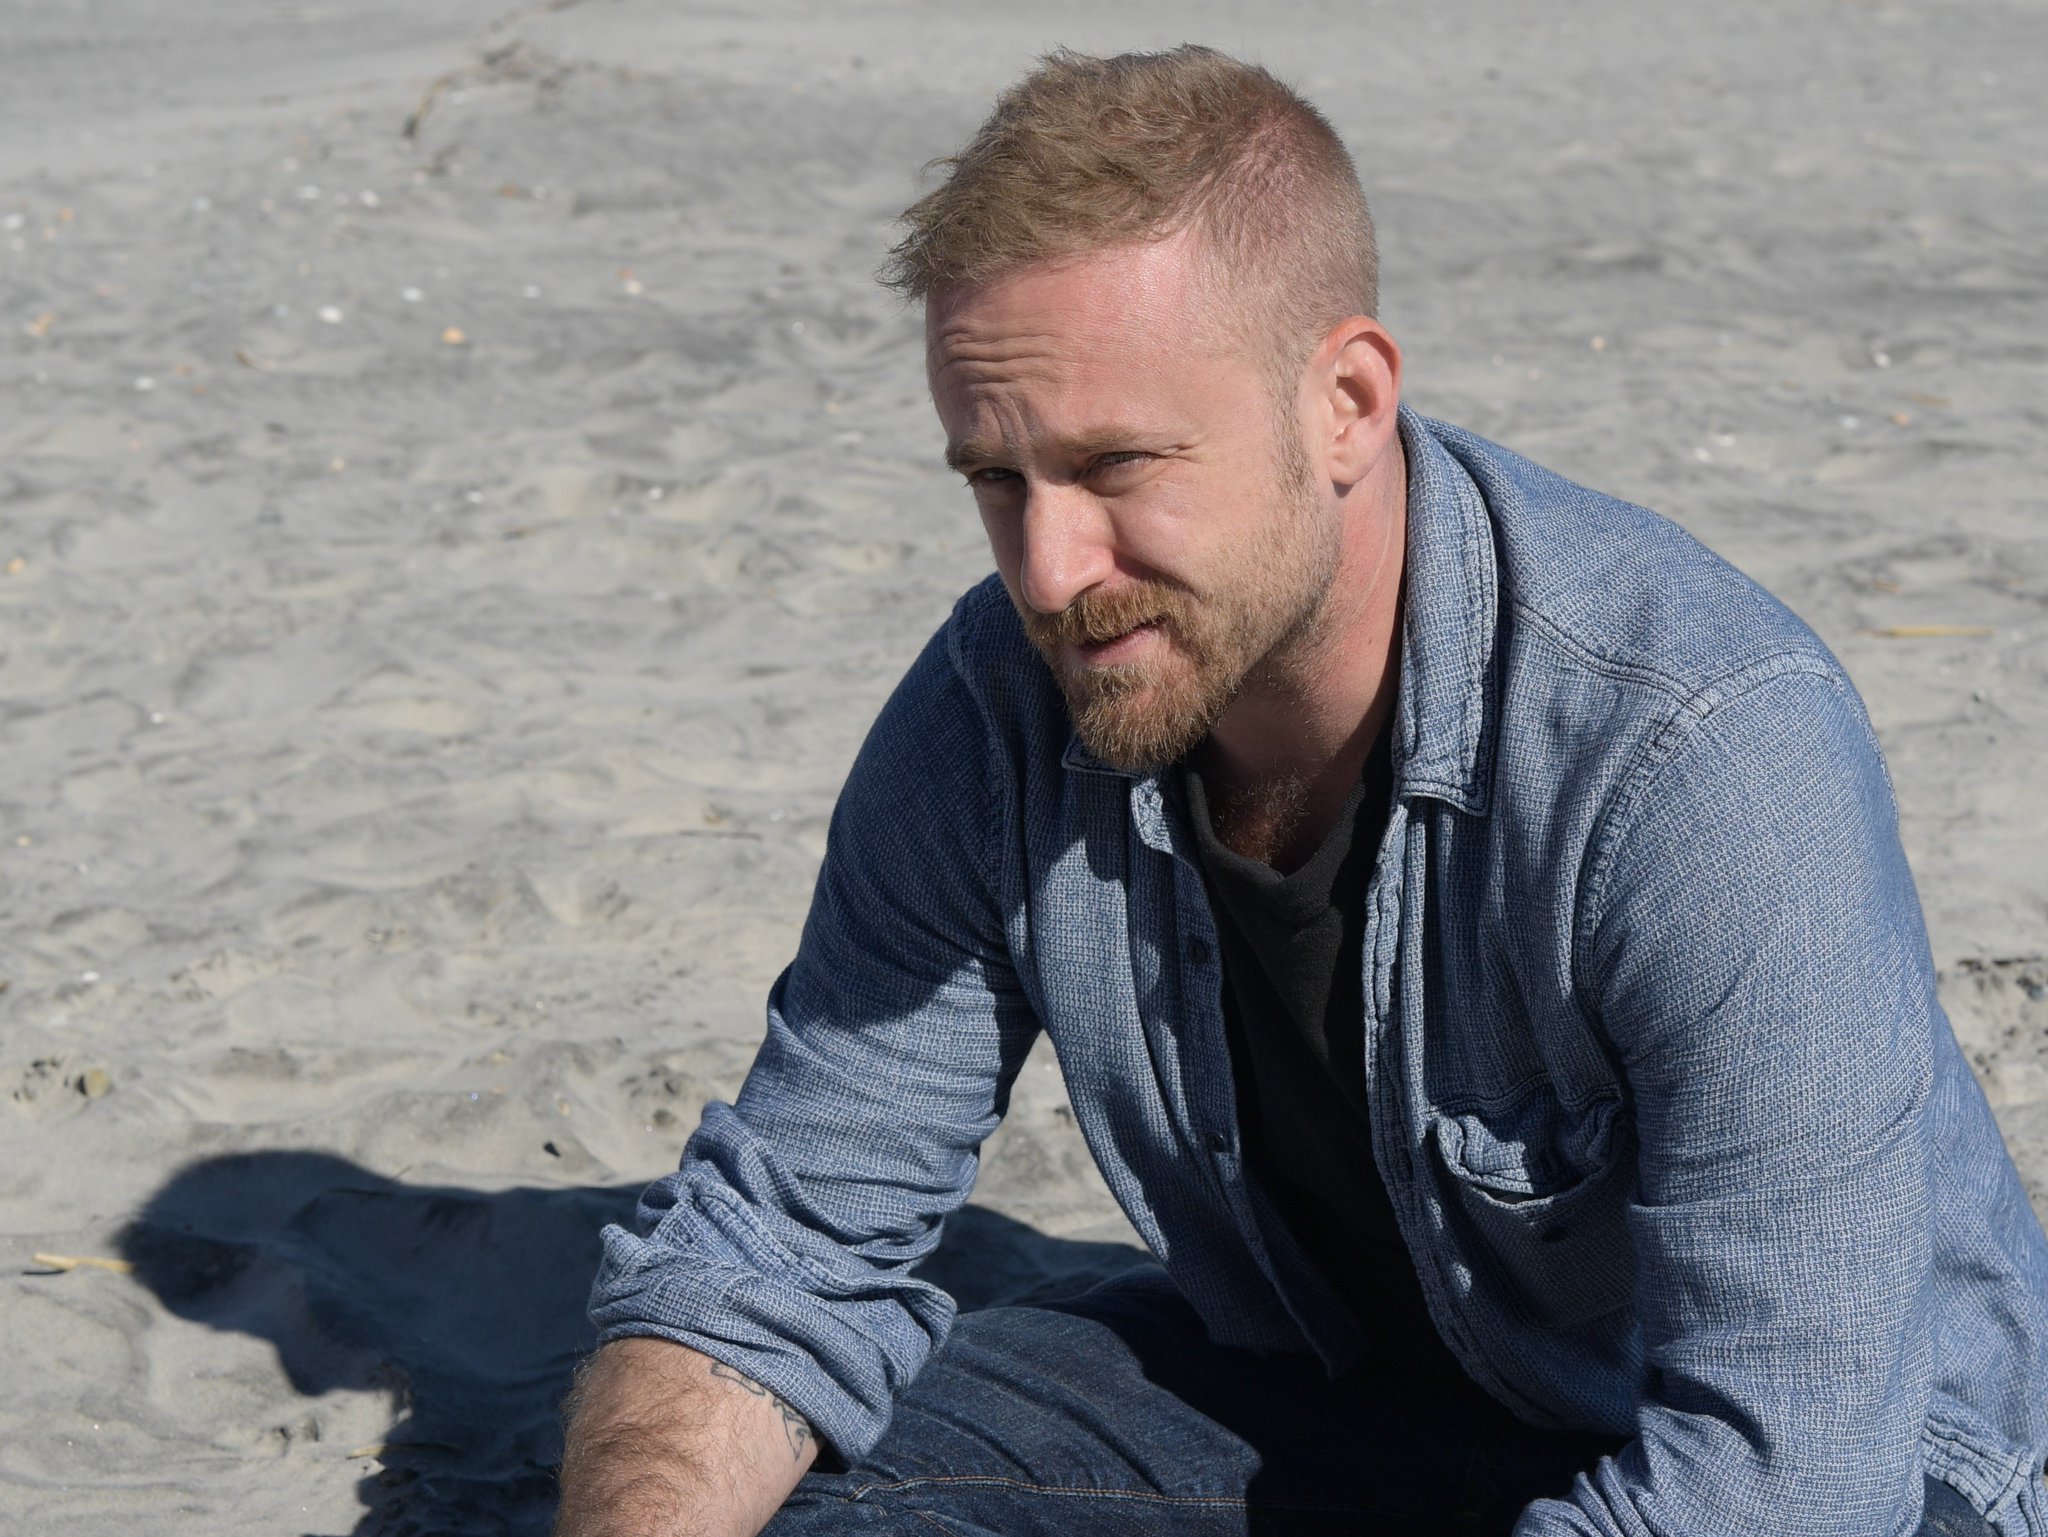 Today we\re wishing Ben Foster a happy birthday you gave us a thrilling performance in 